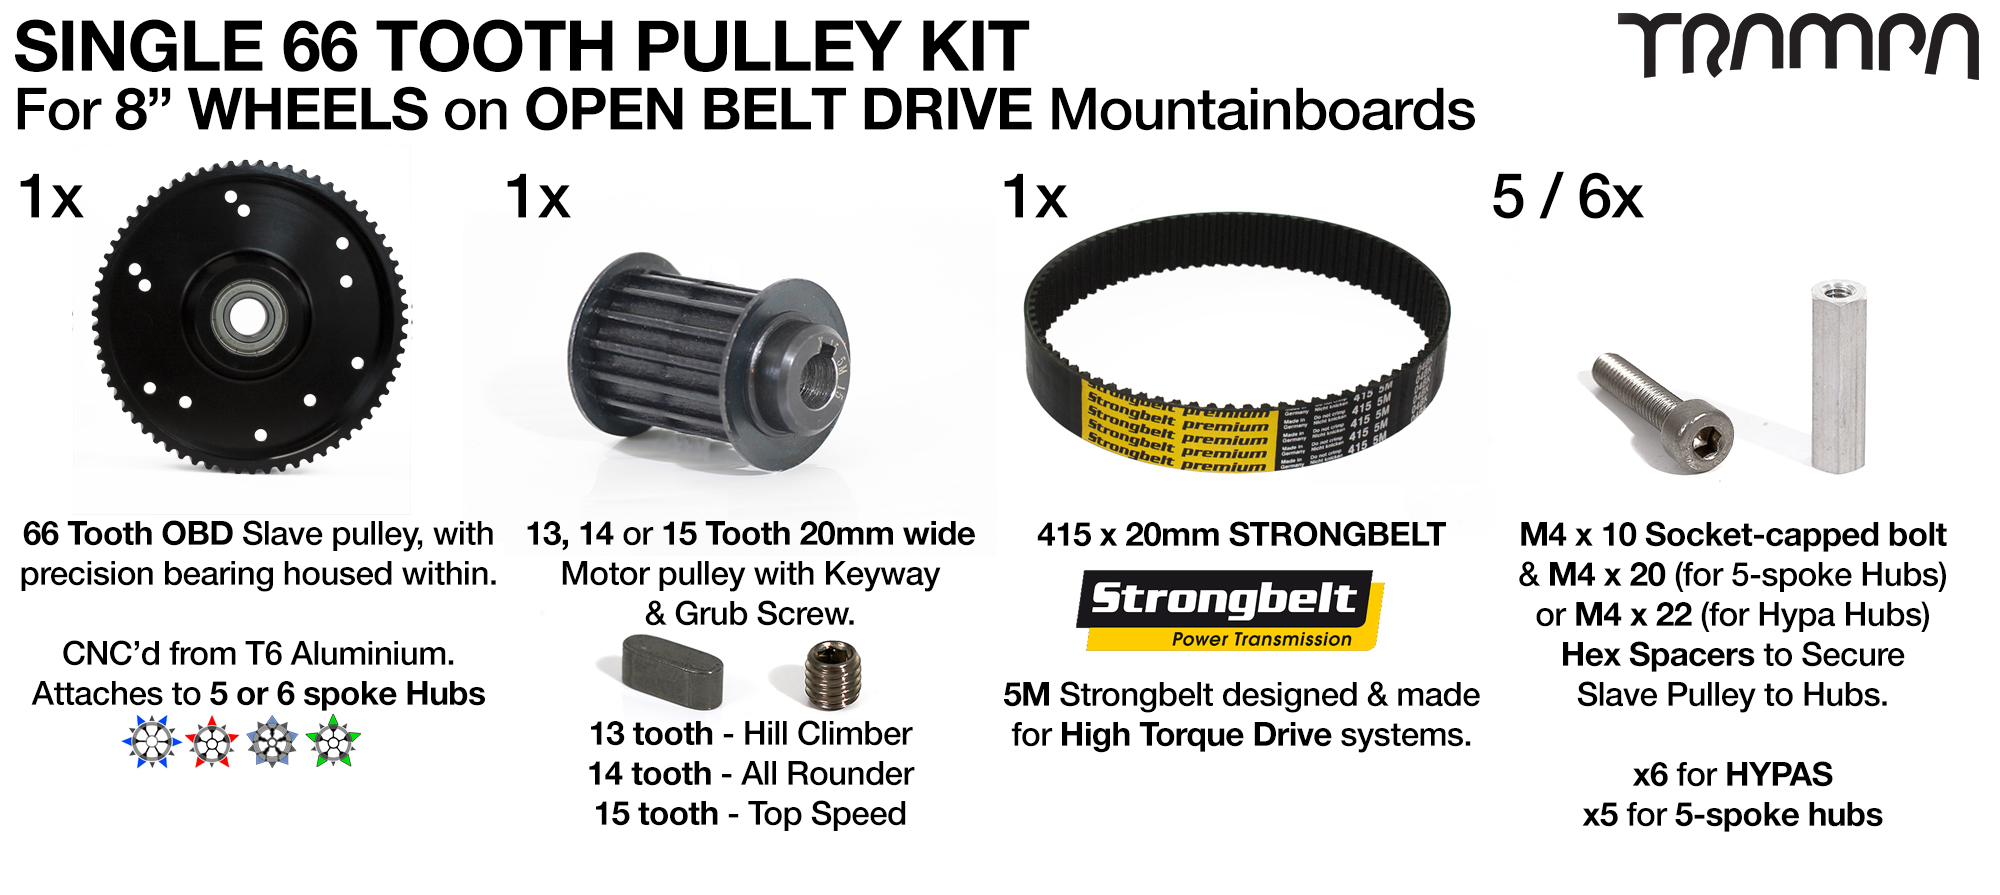 66T Open Belt Drive 8 Inch Wheel 66 Tooth Pulley Kit with 415mm x 20mm Belt for 8 Inch Wheels - SINGLE